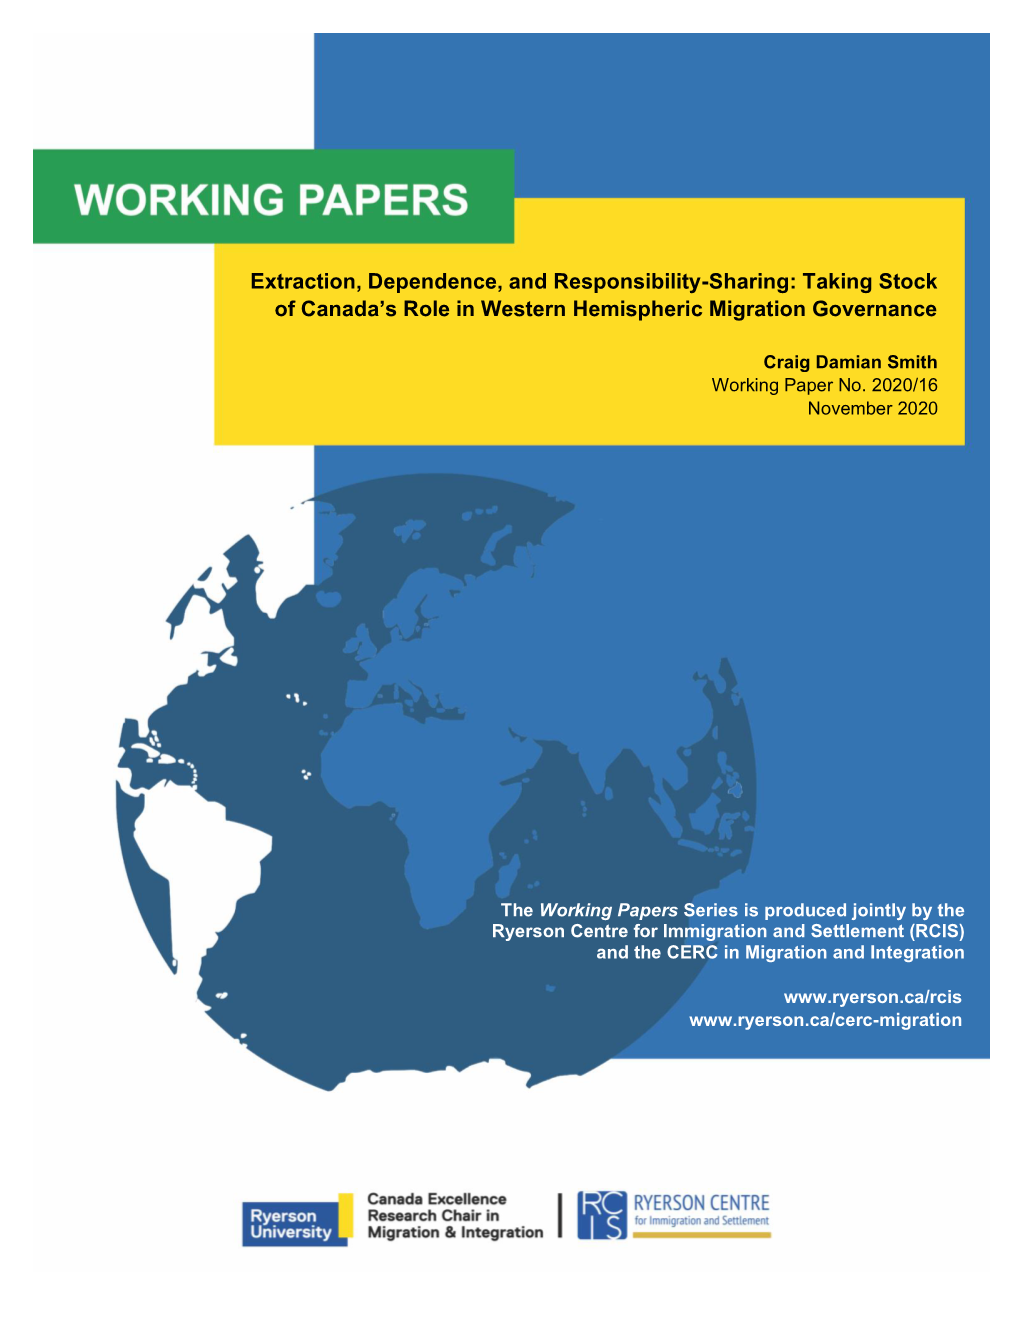 Extraction, Dependence, and Responsibility-Sharing: Taking Stock of Canada's Role in Western Hemispheric Migration Governance